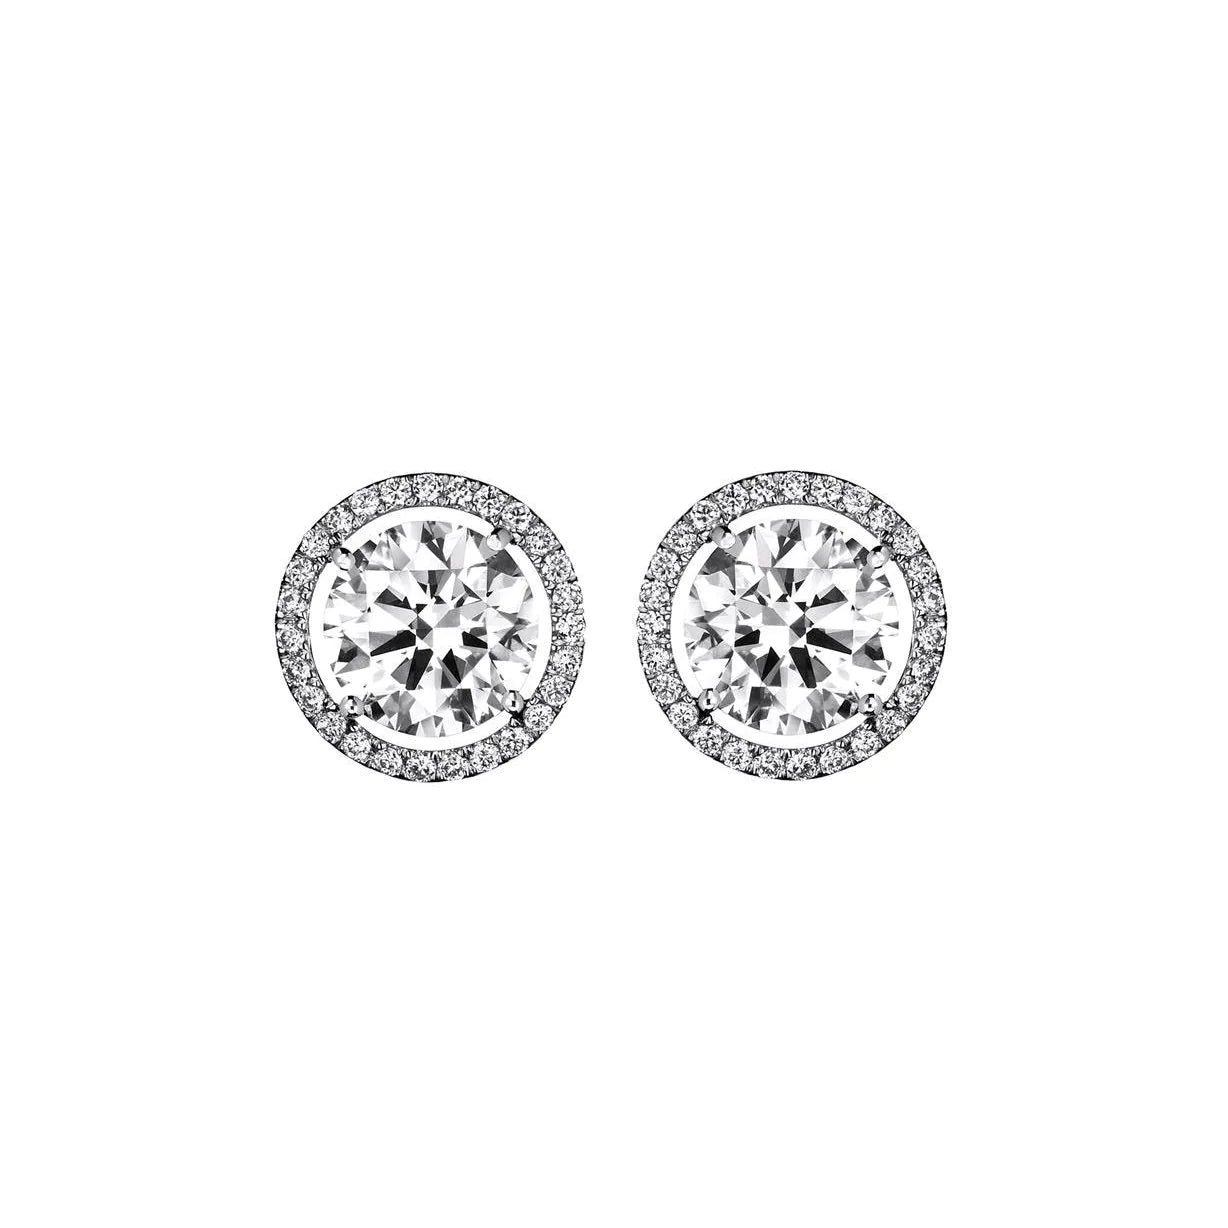 4.04 Carats Gorgeous Round Cut Real Diamond Stud Halo Earrings Gold White 14K